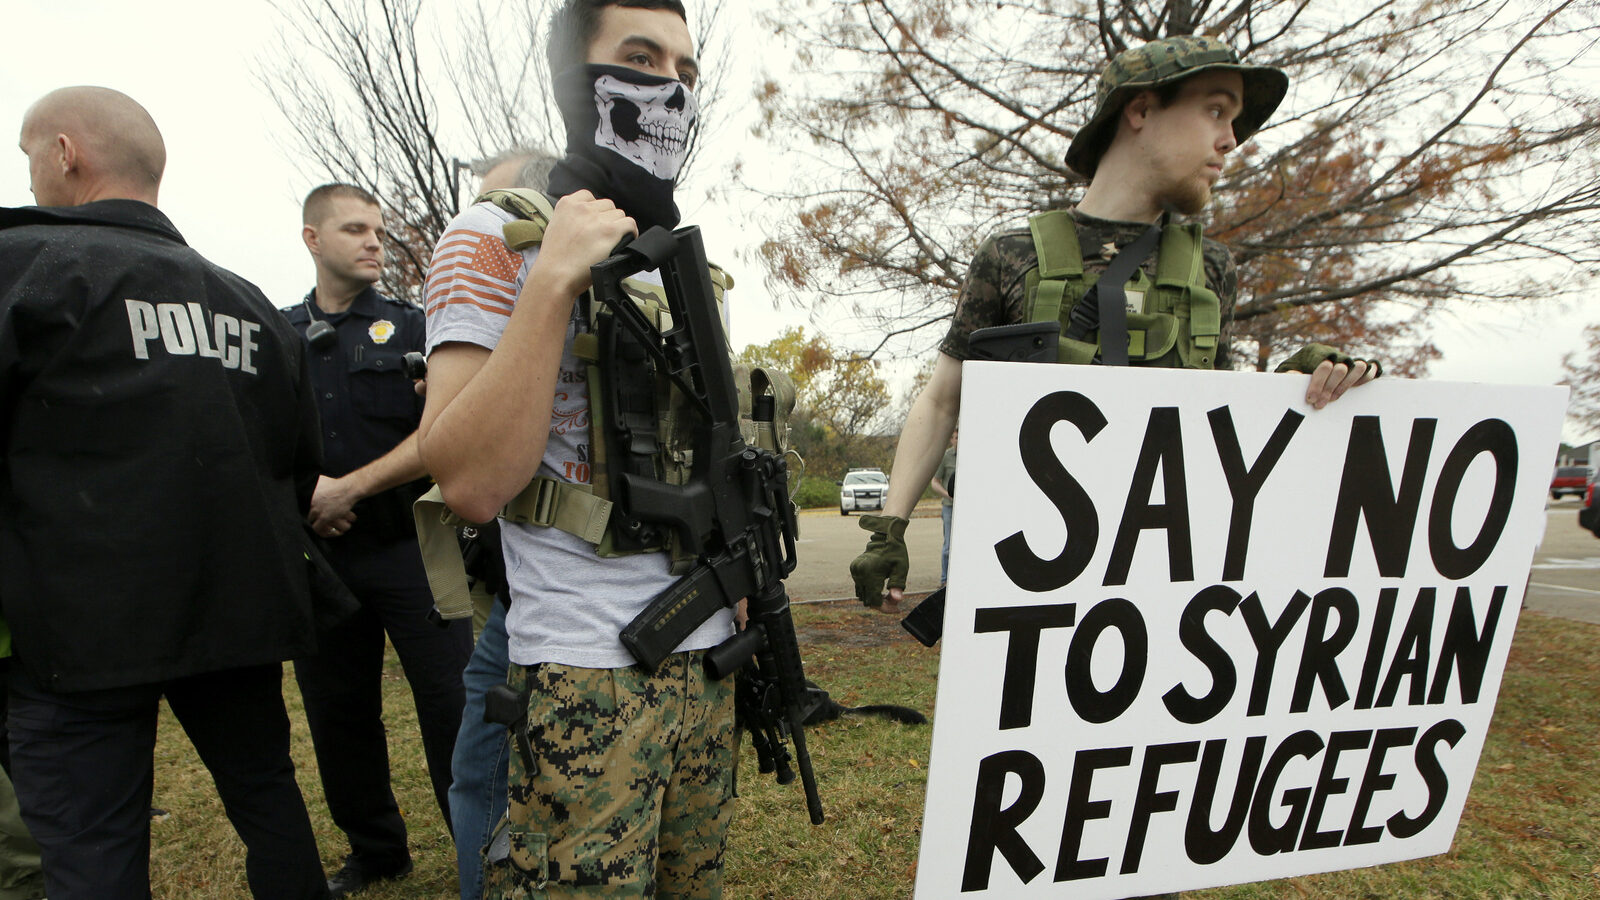 As police stand guard, armed anti-Muslim protestors, who did not want to give their names, stand across the street from a mosque during a demonstration in Richardson, Texas, on Saturday, Dec. 12, 2015. (AP Photo/LM Otero)